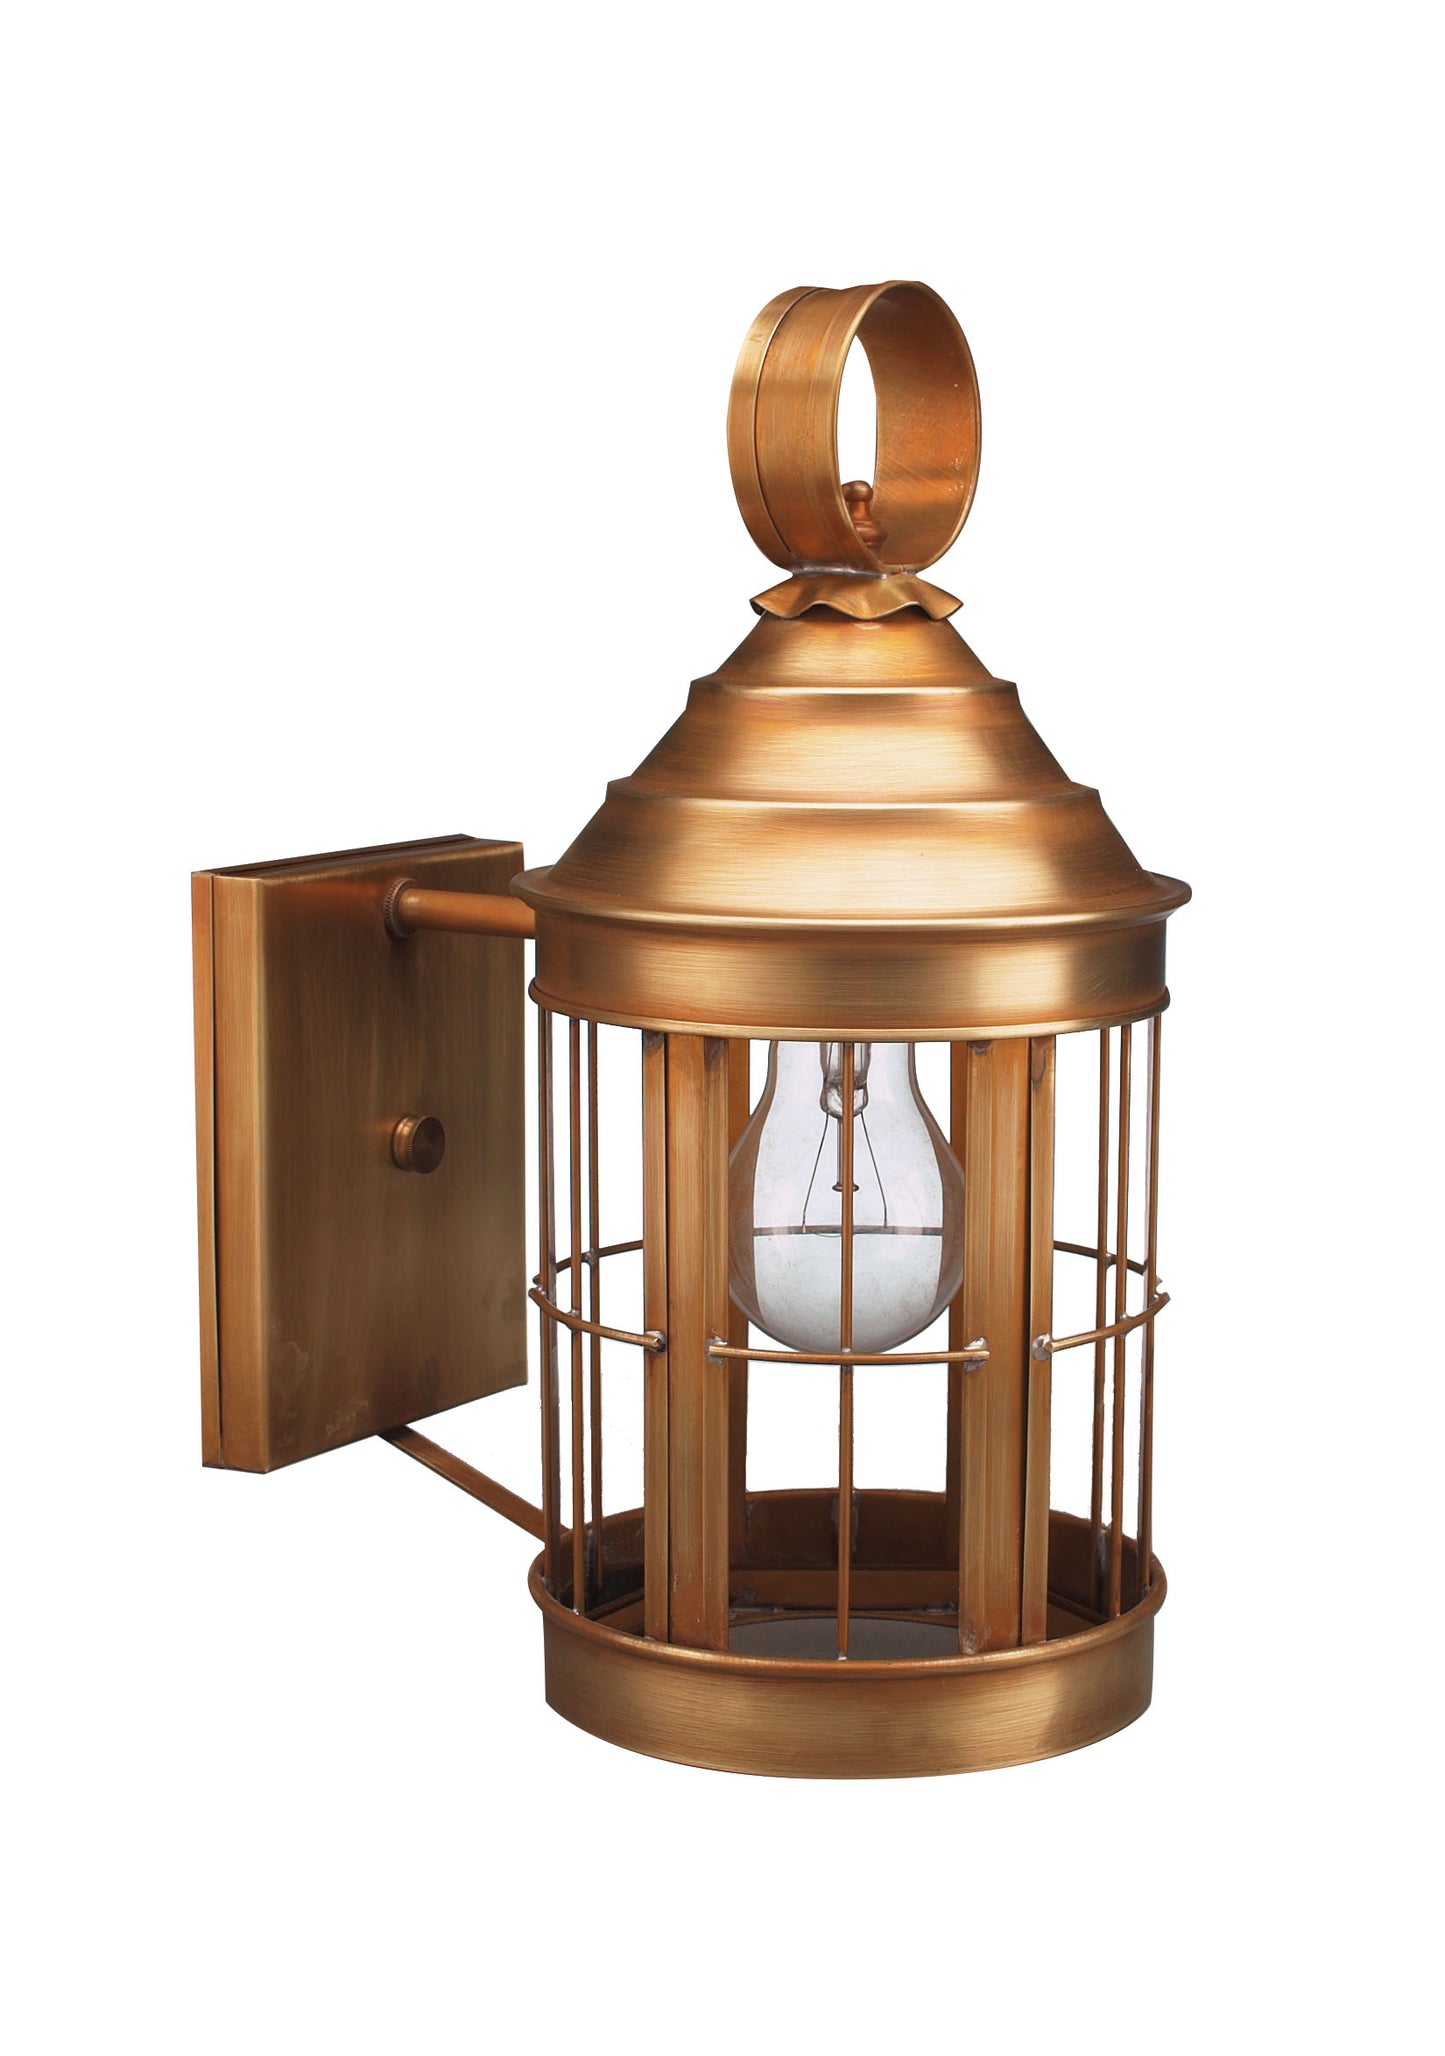 Heal Cone Top Outdoor Wall Lantern with Open Bottom 3317